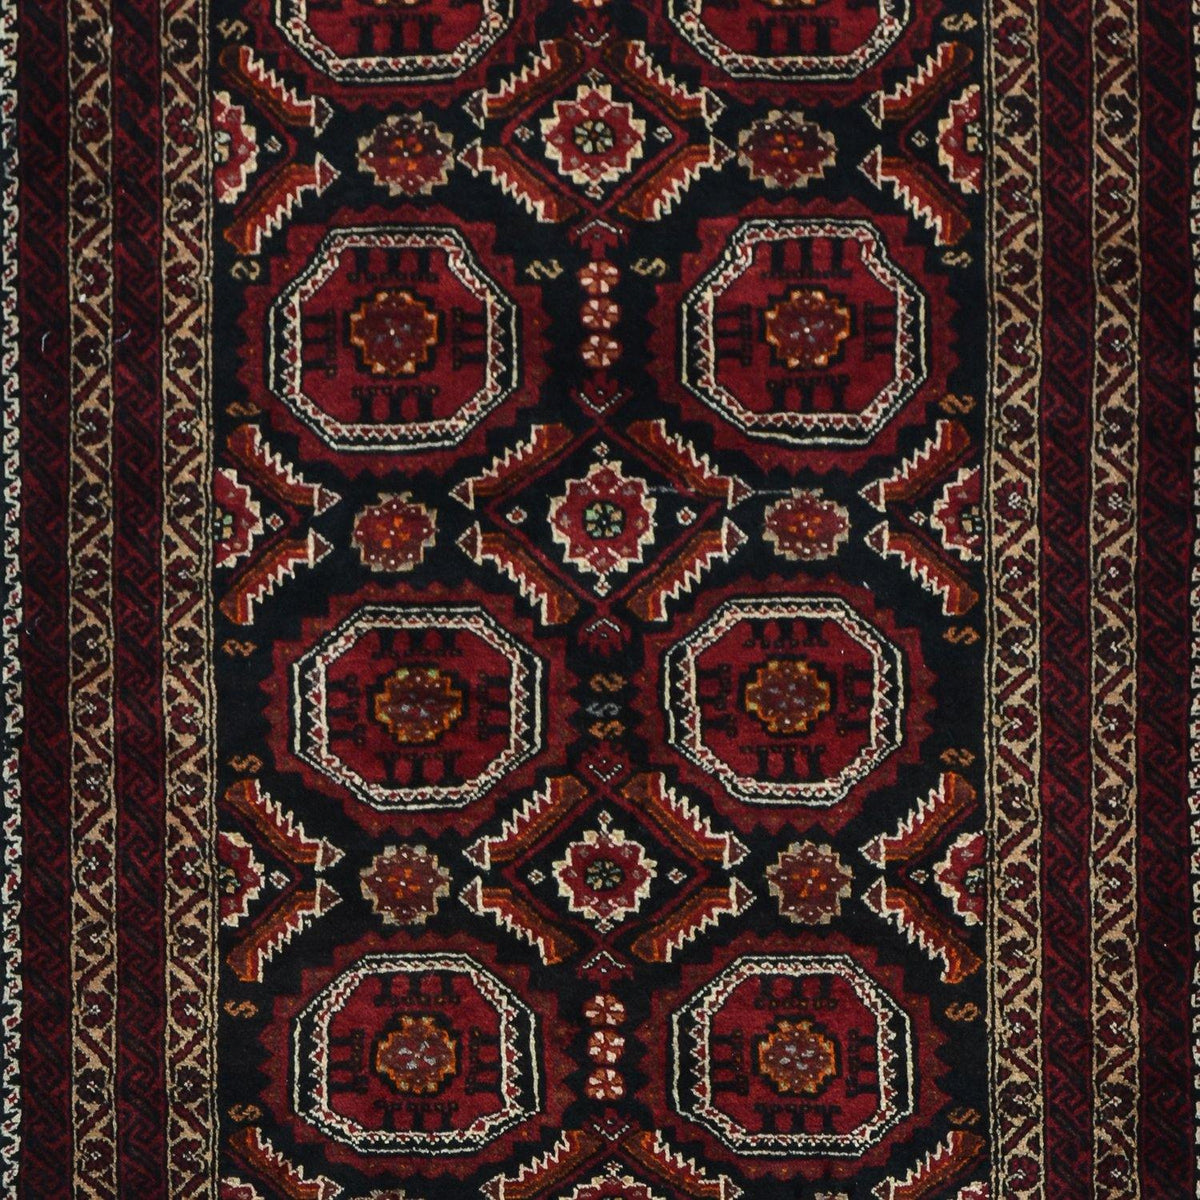 Fine Hand-knotted Wool Baluchi Persian Rug 98cm x 192cm